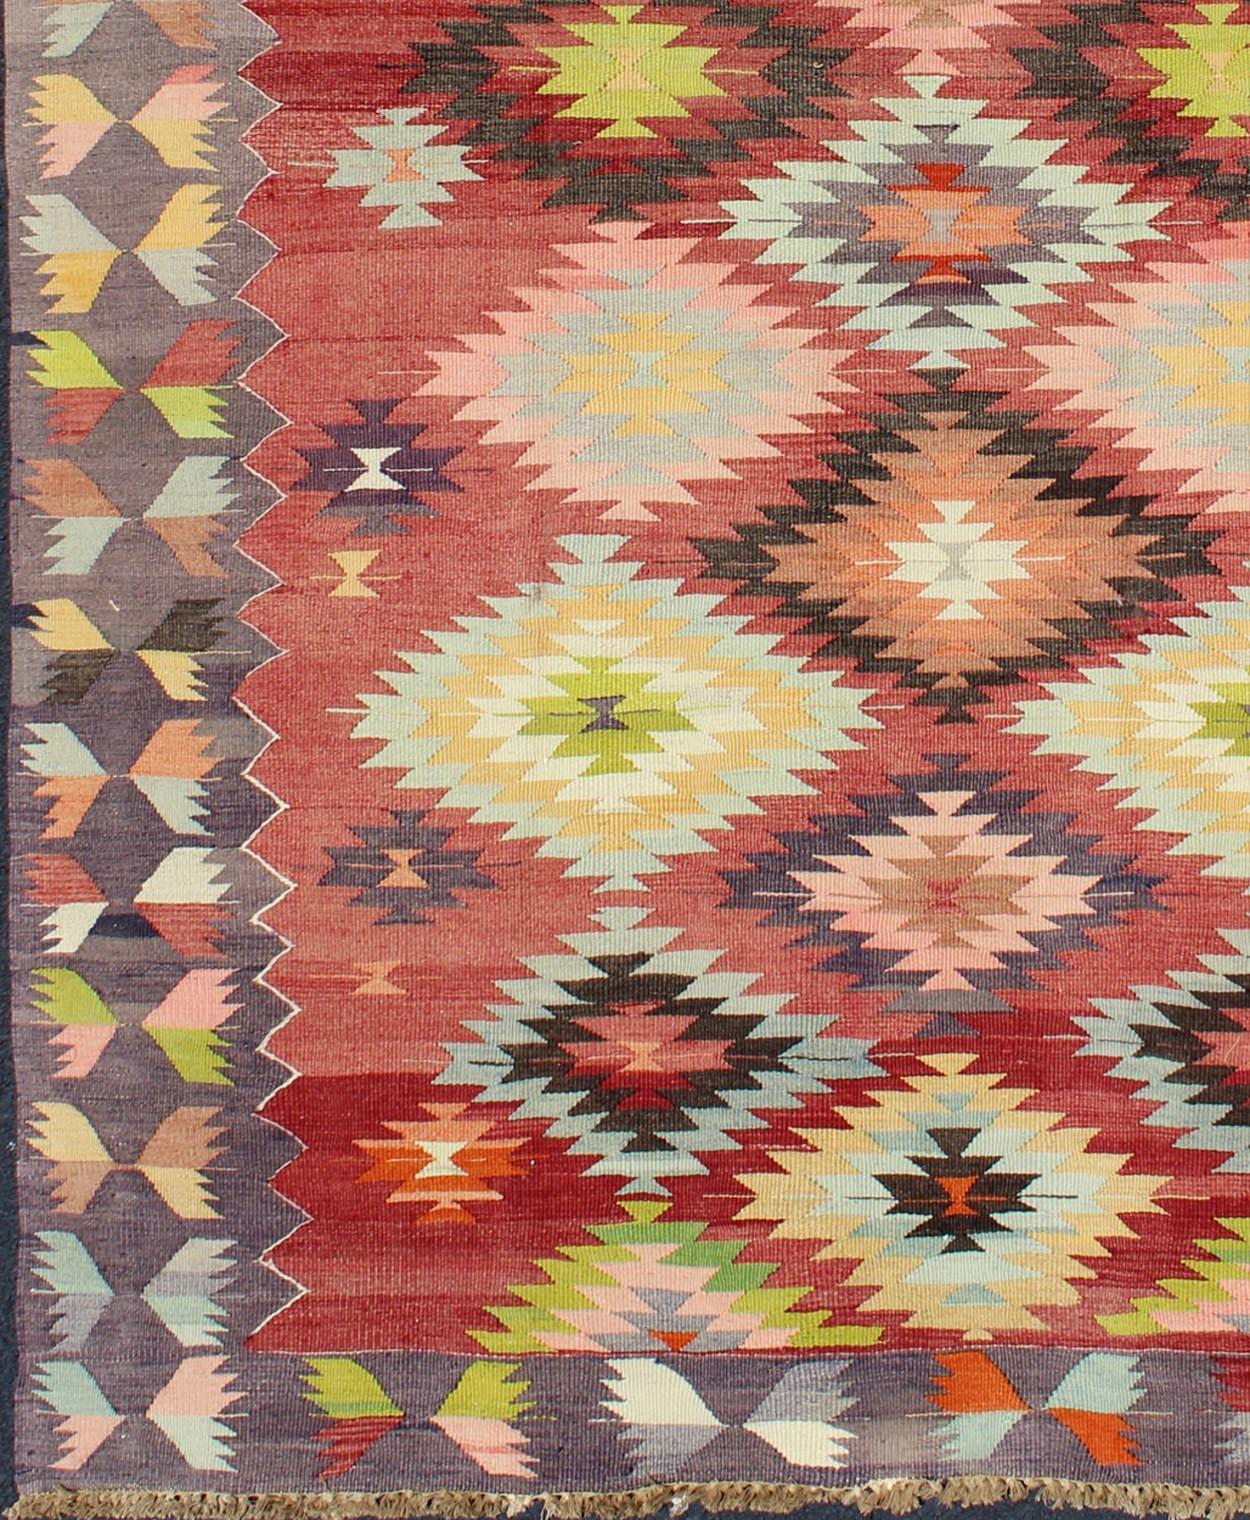 Colorful Turkish Kilim Carpet with Geometric Design.
This beautiful vintage Turkish Kilim from the 1960s features bold and colorful geometric designs throughout both its centre field and border. Colors include red, lime green, salmon, ivory, grey,